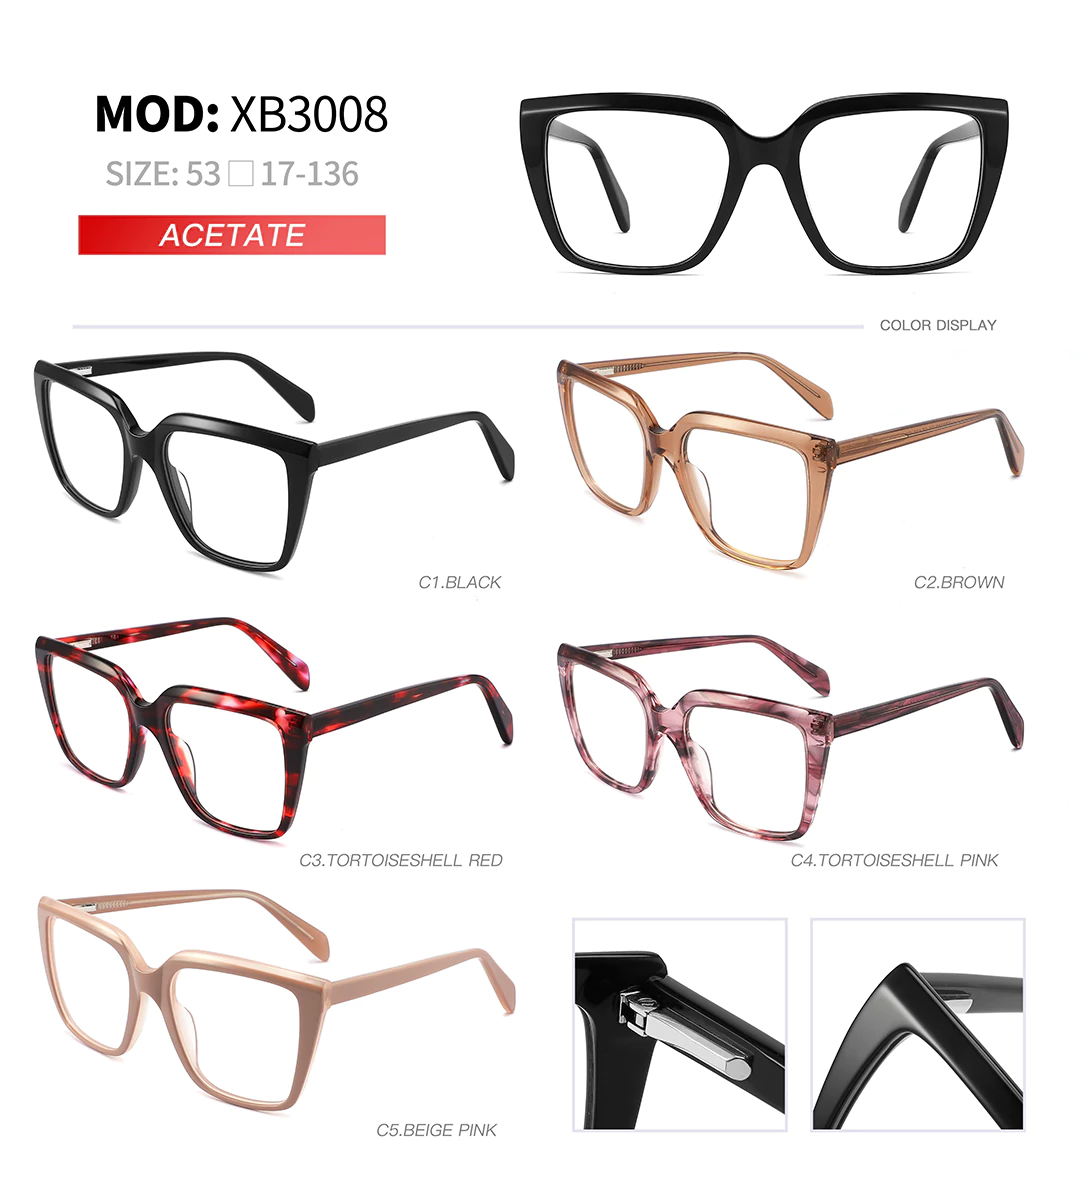 Optical Frame XB3008 Size Different Styles Color Detail Shot